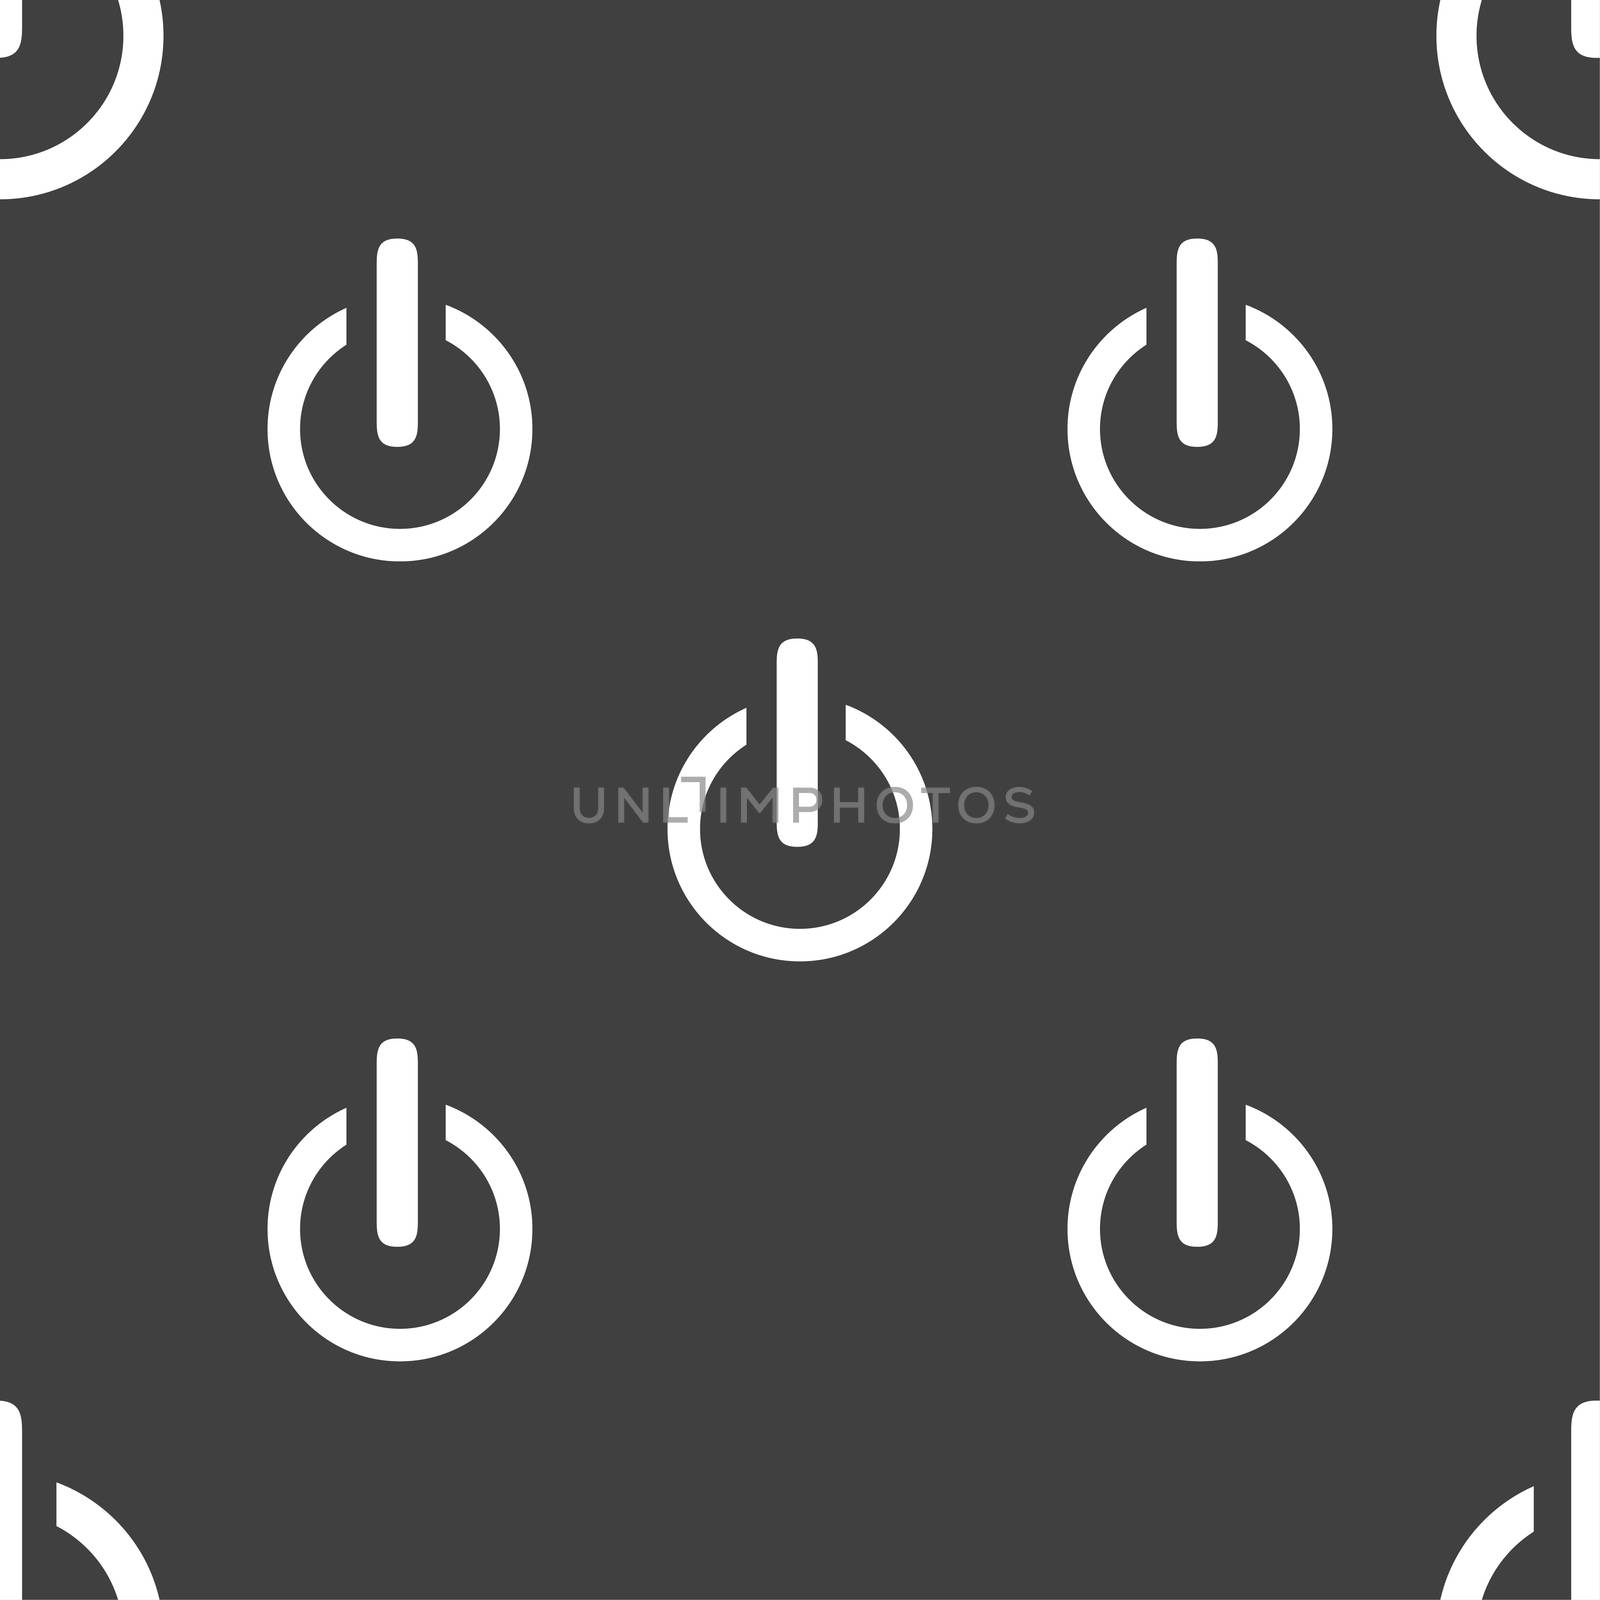 Power sign icon. Switch on symbol. Seamless pattern on a gray background. illustration